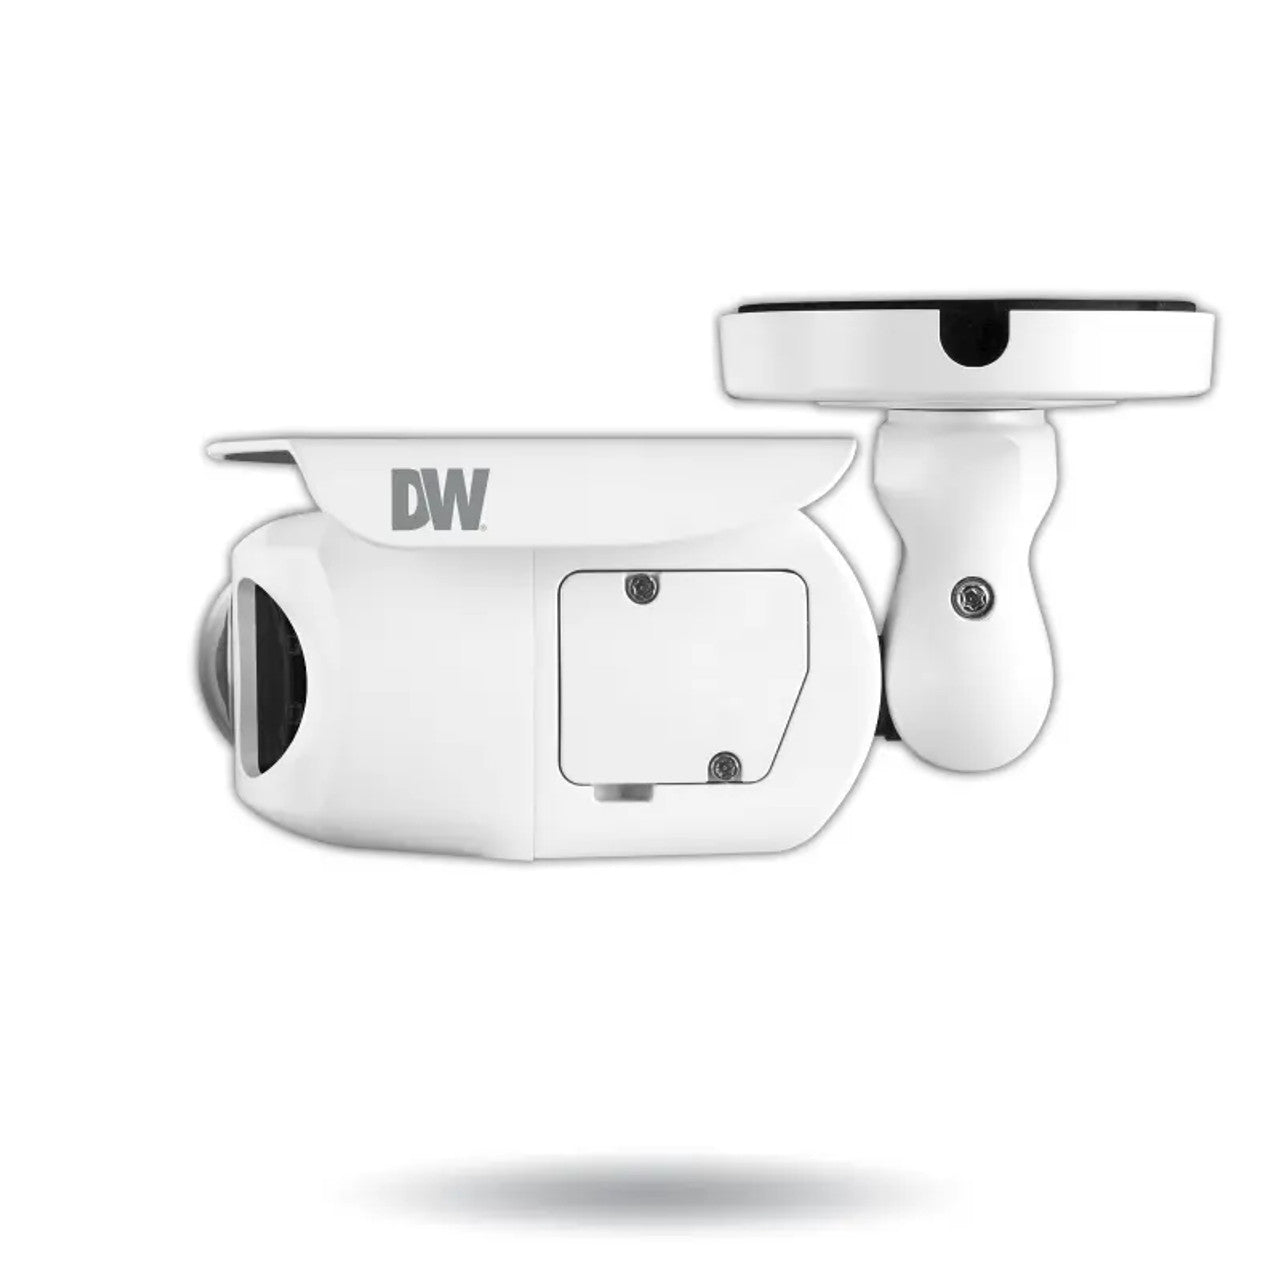 Digital Watchdog DWC-MBW8Wi2TW 8MP 4K Night Vision Outdoor Bullet IP Security Camera with 2.3mm Ultra-Wide Lens